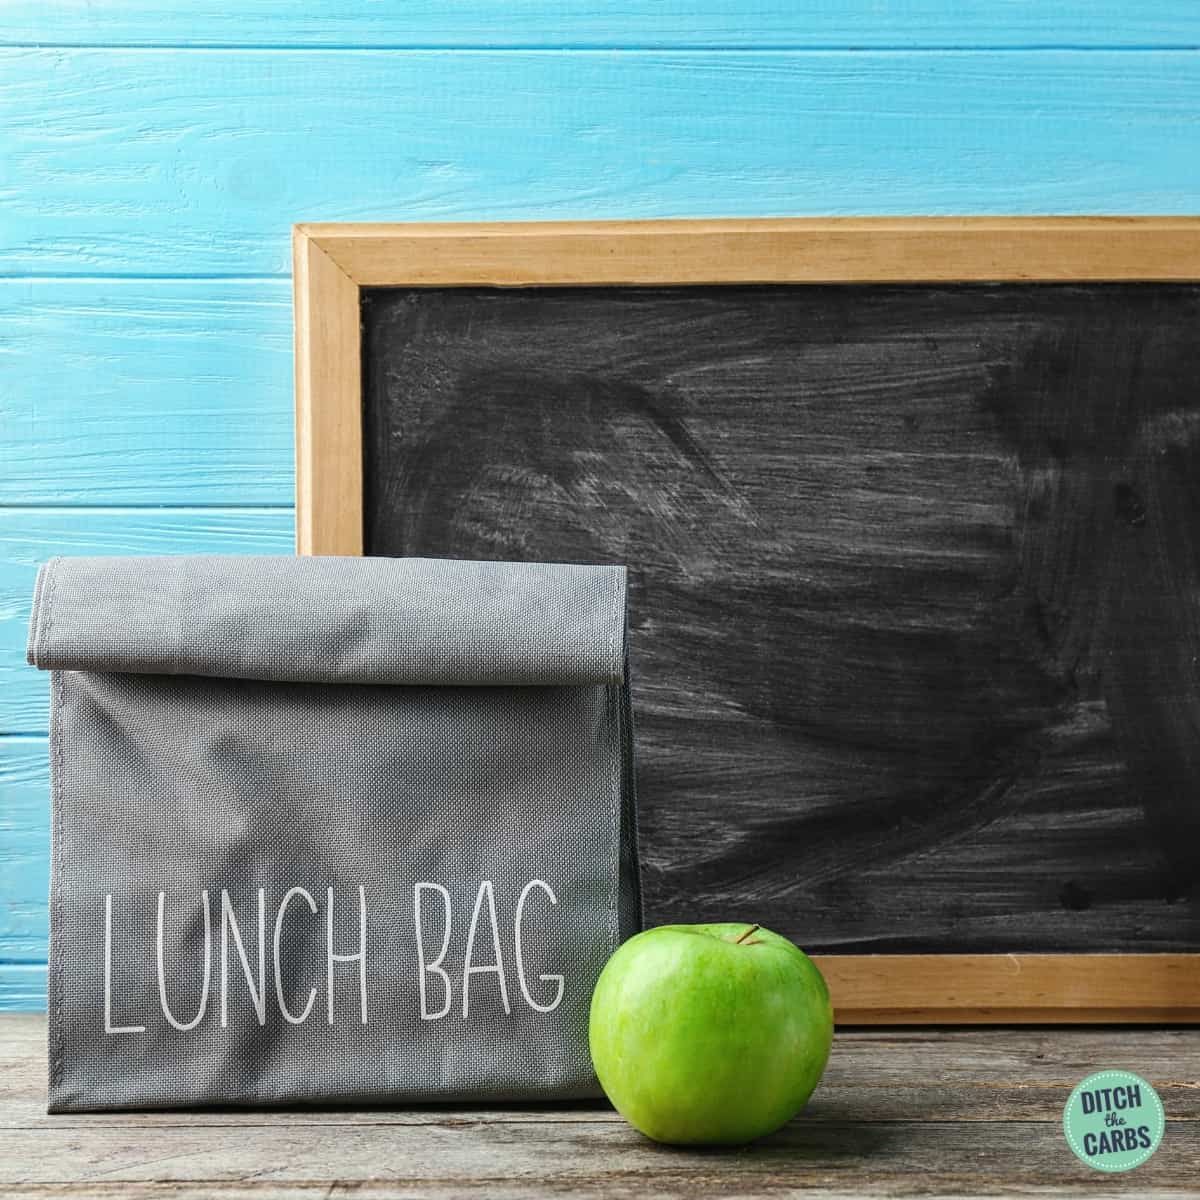 21 Easy Healthy School Lunch Ideas (Plus 50 Snack Ideas) - how to save time and money